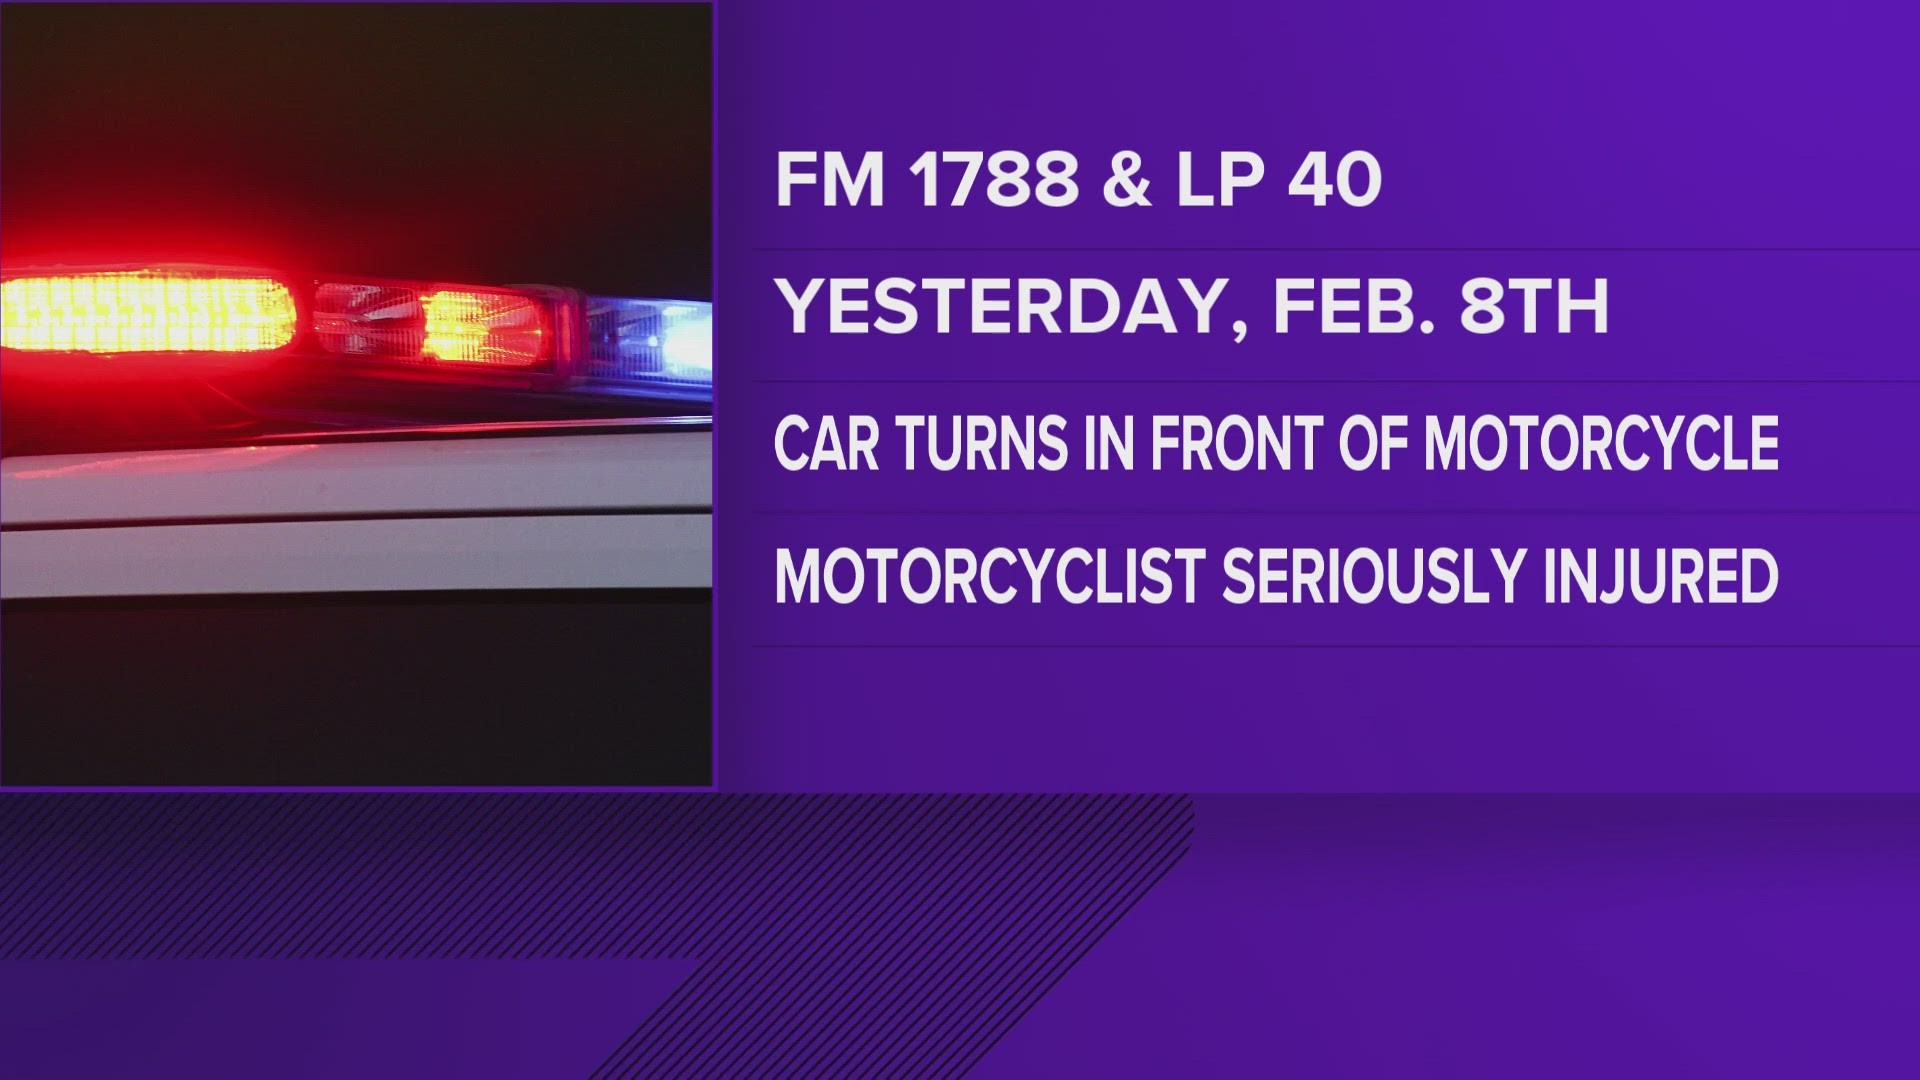 On Thursday at about 6:55 p.m., a motorcyclist was hit by a car trying to turn, according to the City of Midland.